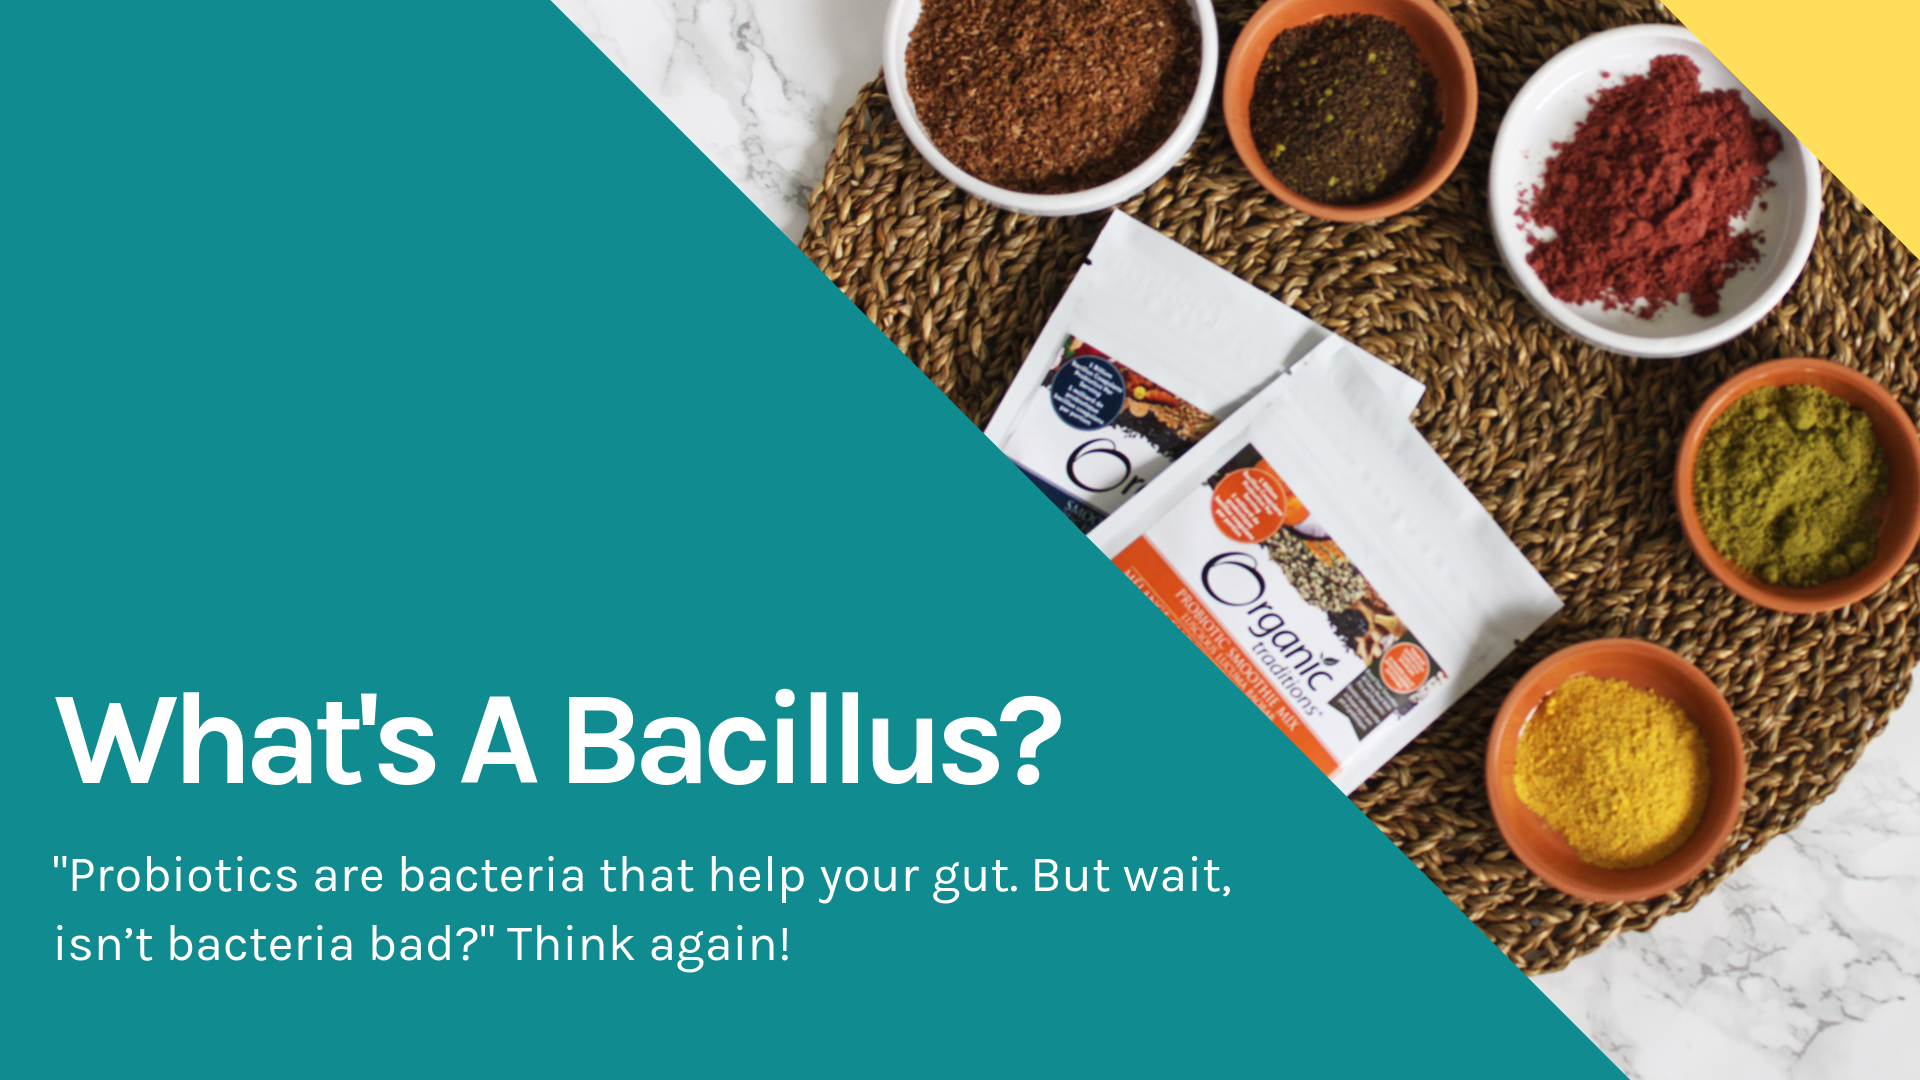 What's a Bacillus?